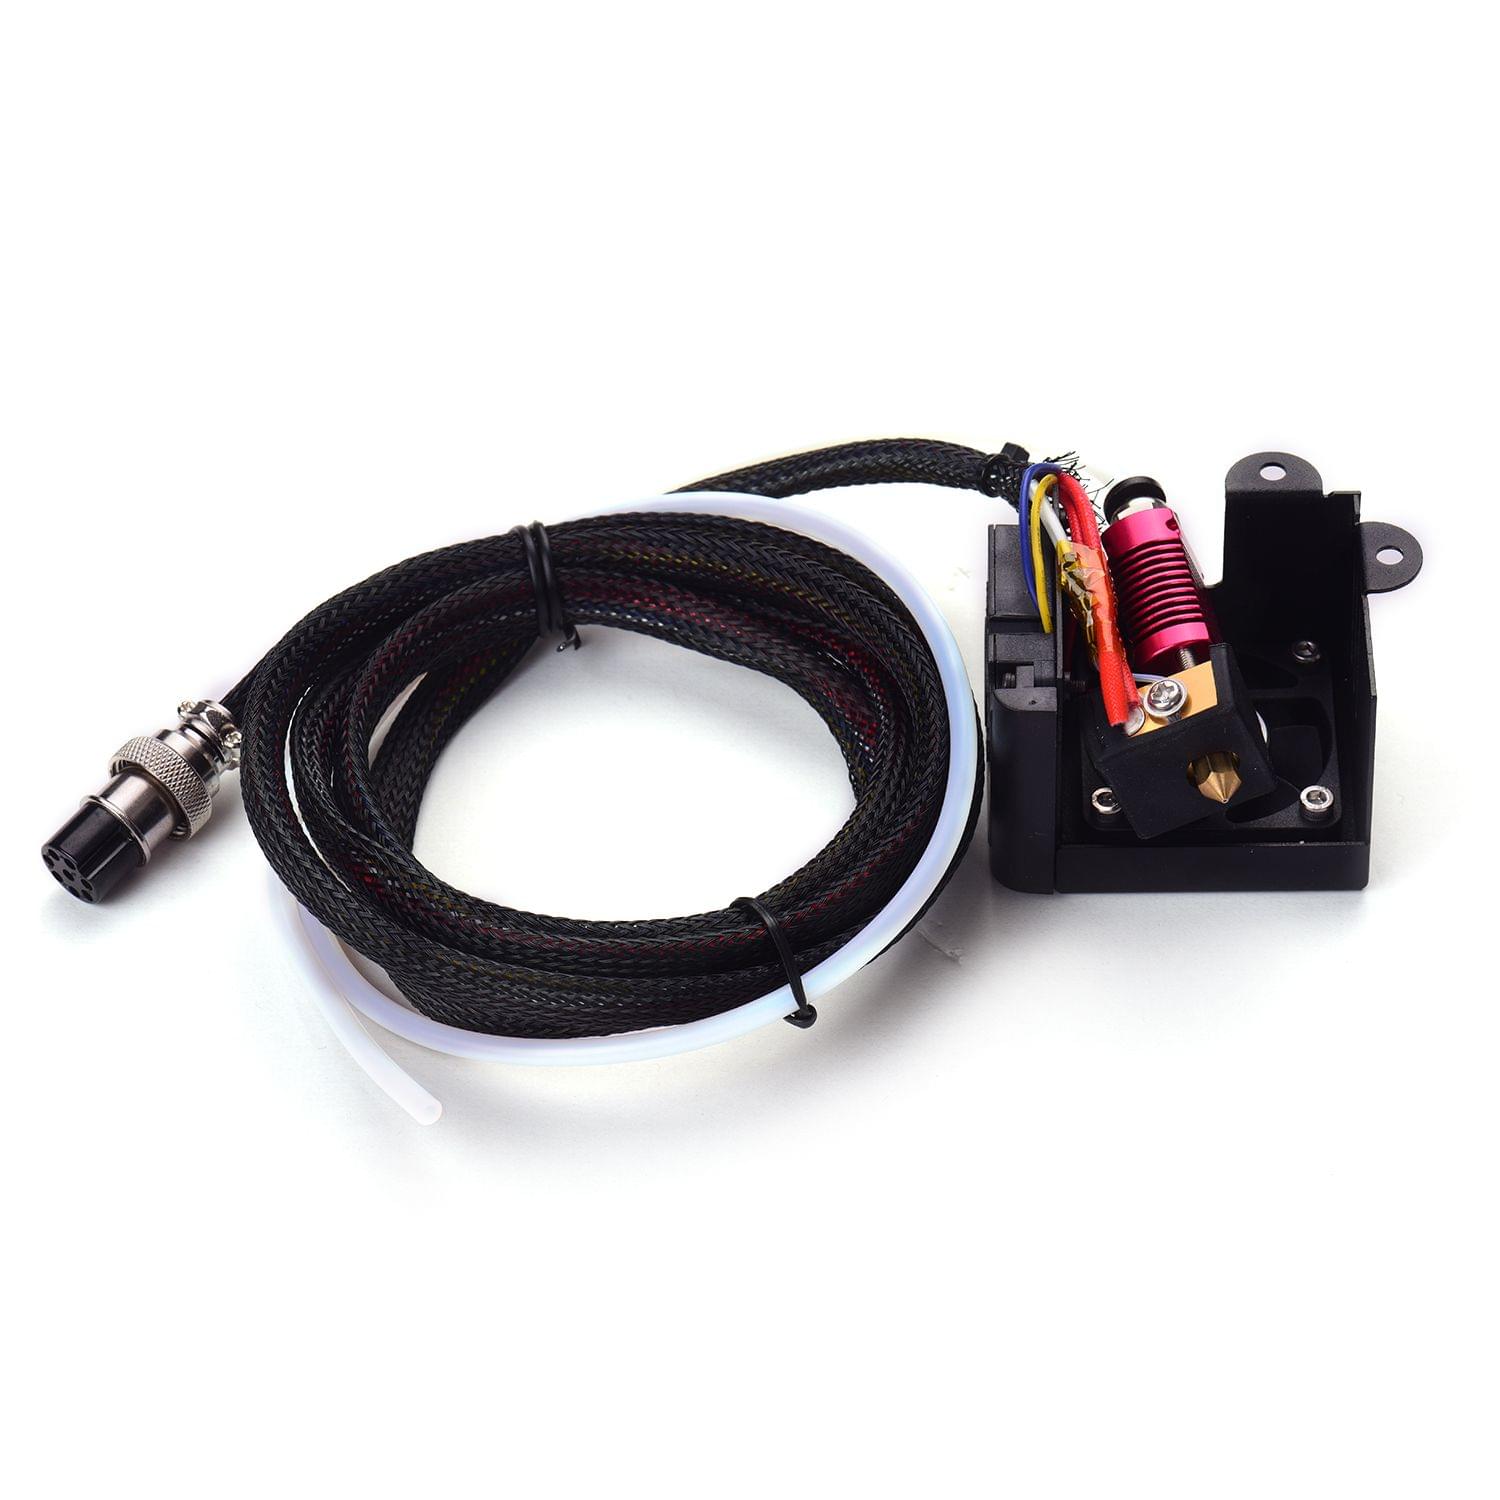 1.75mm Hotend Extruder Kit with 0.4mm Nozzle Double